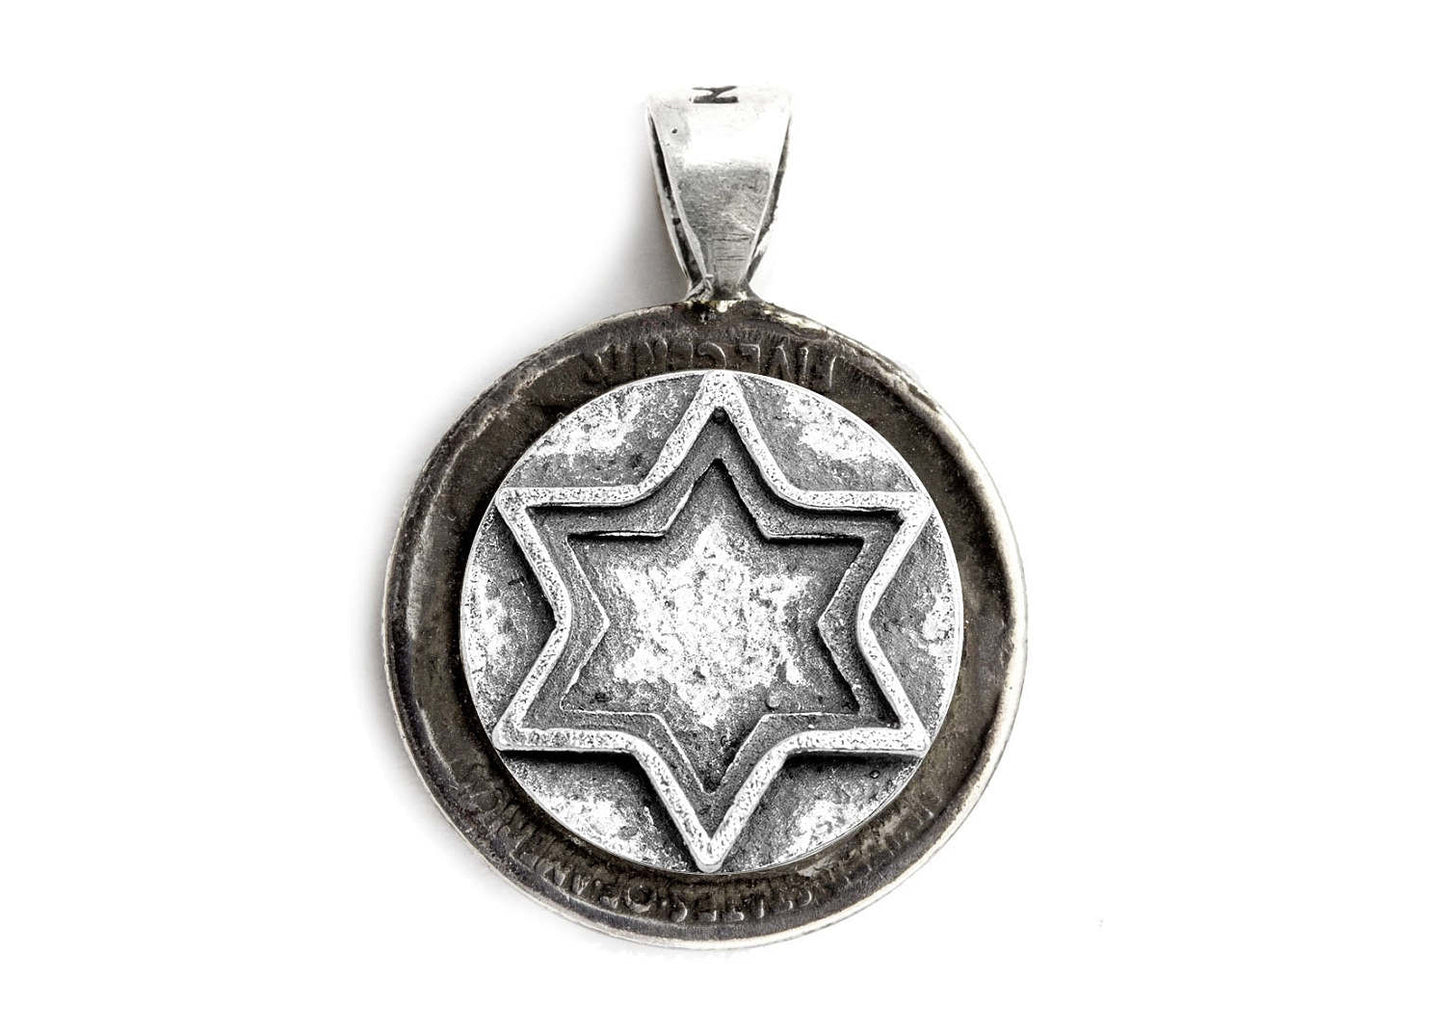 Star of David Coin Medallion Pendant on the Buffalo Nickel coin of USA - coin jewelry